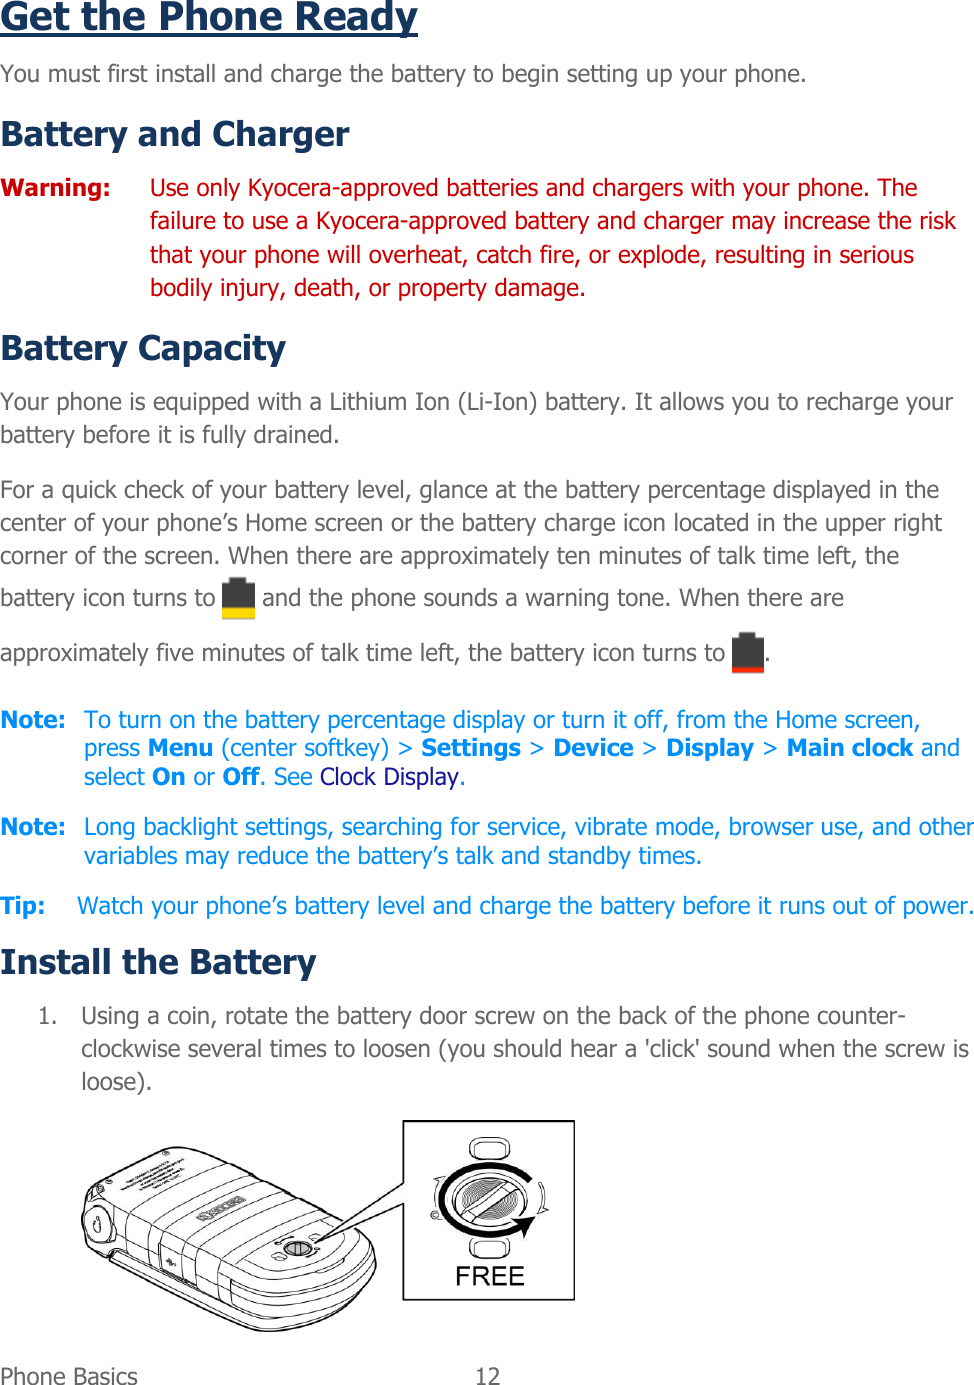  Phone Basics  12   Get the Phone Ready You must first install and charge the battery to begin setting up your phone. Battery and Charger  Warning:  Use only Kyocera-approved batteries and chargers with your phone. The failure to use a Kyocera-approved battery and charger may increase the risk that your phone will overheat, catch fire, or explode, resulting in serious bodily injury, death, or property damage. Battery Capacity Your phone is equipped with a Lithium Ion (Li-Ion) battery. It allows you to recharge your battery before it is fully drained. For a quick check of your battery level, glance at the battery percentage displayed in the center of your phone’s Home screen or the battery charge icon located in the upper right corner of the screen. When there are approximately ten minutes of talk time left, the battery icon turns to   and the phone sounds a warning tone. When there are approximately five minutes of talk time left, the battery icon turns to  . Note:  To turn on the battery percentage display or turn it off, from the Home screen, press Menu (center softkey) &gt; Settings &gt; Device &gt; Display &gt; Main clock and select On or Off. See Clock Display. Note:  Long backlight settings, searching for service, vibrate mode, browser use, and other variables may reduce the battery’s talk and standby times. Tip: Watch your phone’s battery level and charge the battery before it runs out of power. Install the Battery 1. Using a coin, rotate the battery door screw on the back of the phone counter-clockwise several times to loosen (you should hear a &apos;click&apos; sound when the screw is loose).  